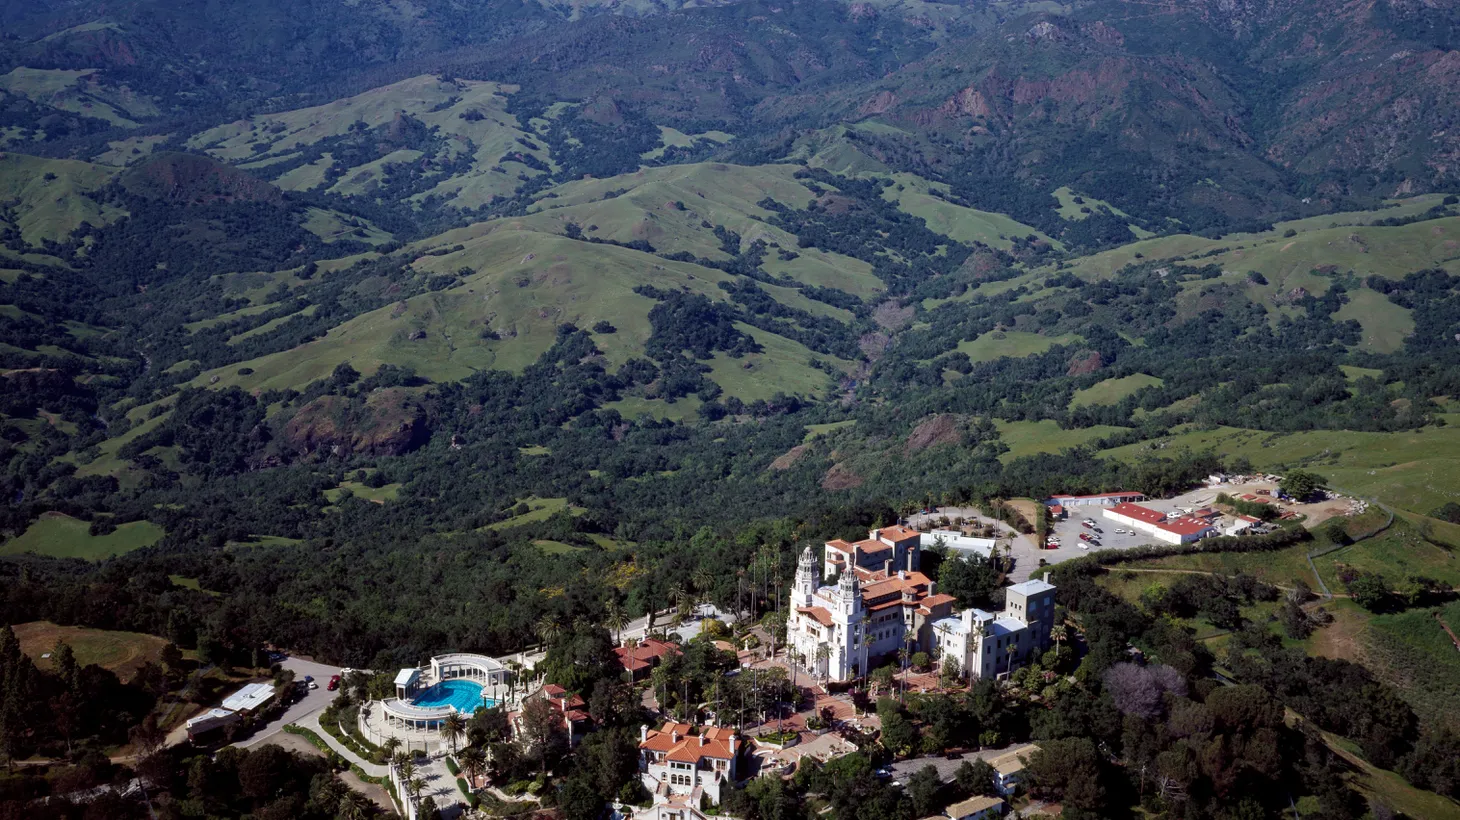 An aerial view shows the estate W.R. Hearst christened La Cuesta Encantada (The Enchanted Hill), the site of Hearst Castle in San Simeon.